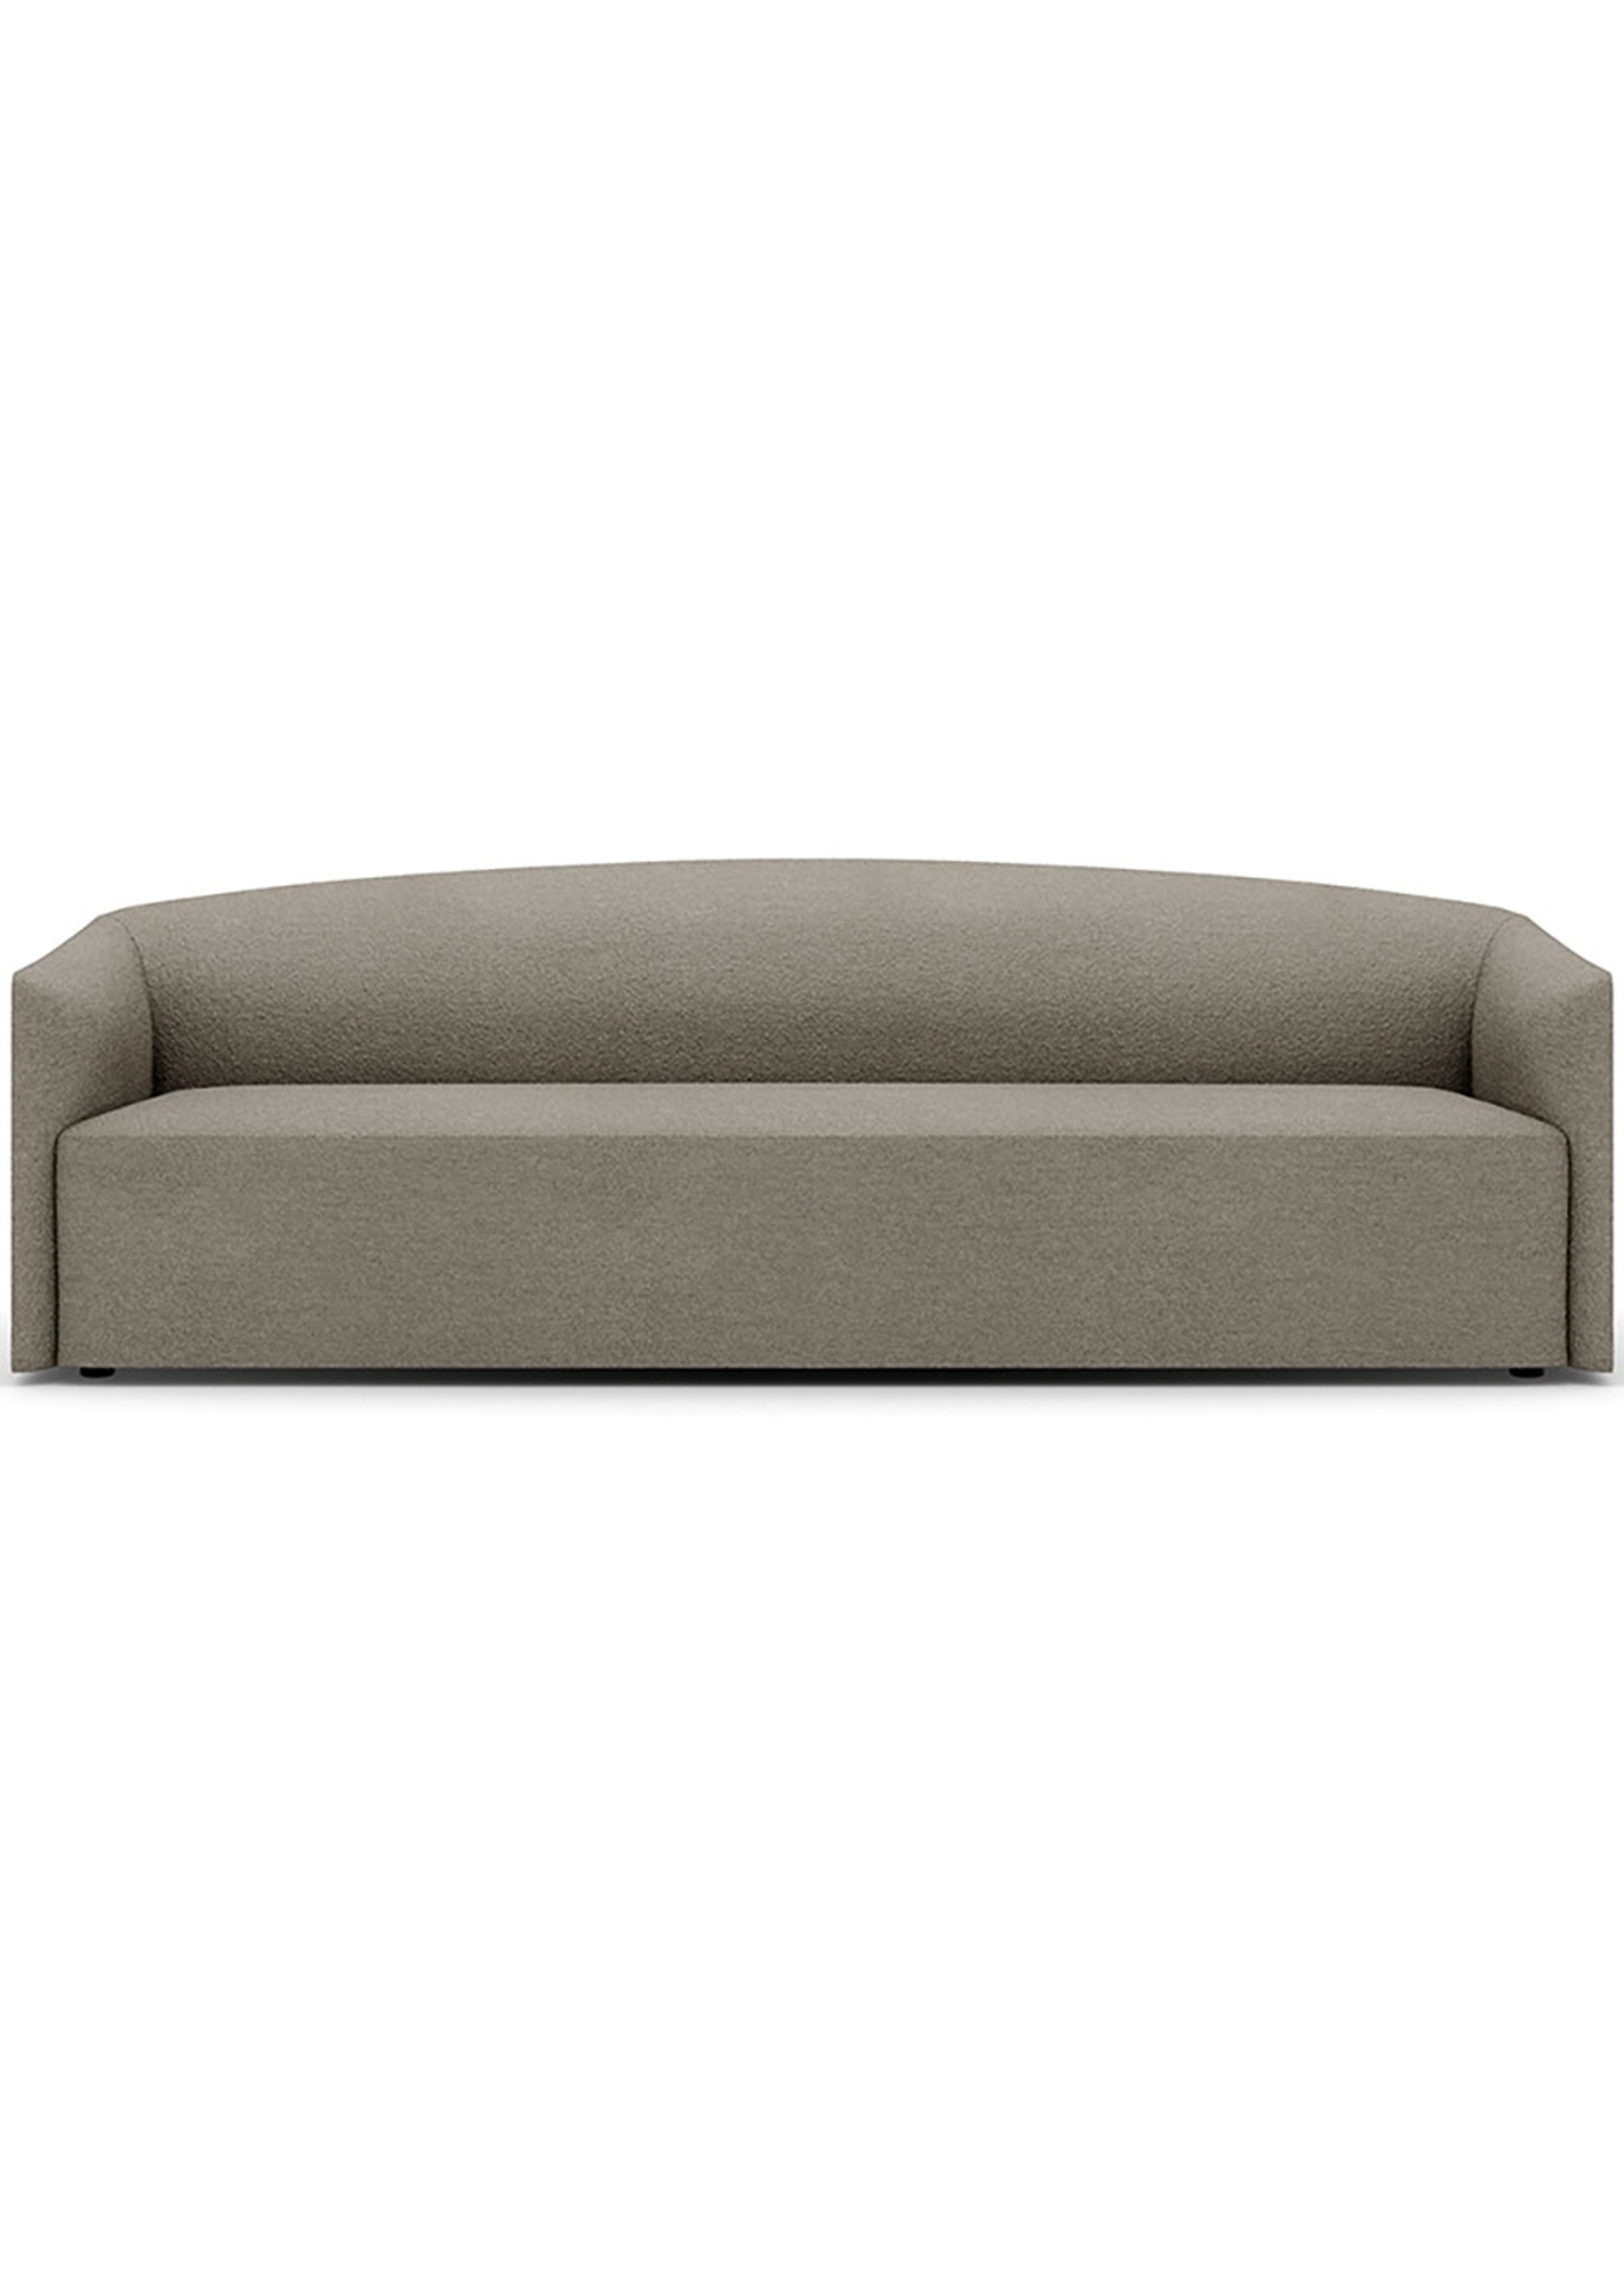 New Works - 3-Personen-Sofa - Shore Sofa 3 Seater Extended Base - Marlon Taupe